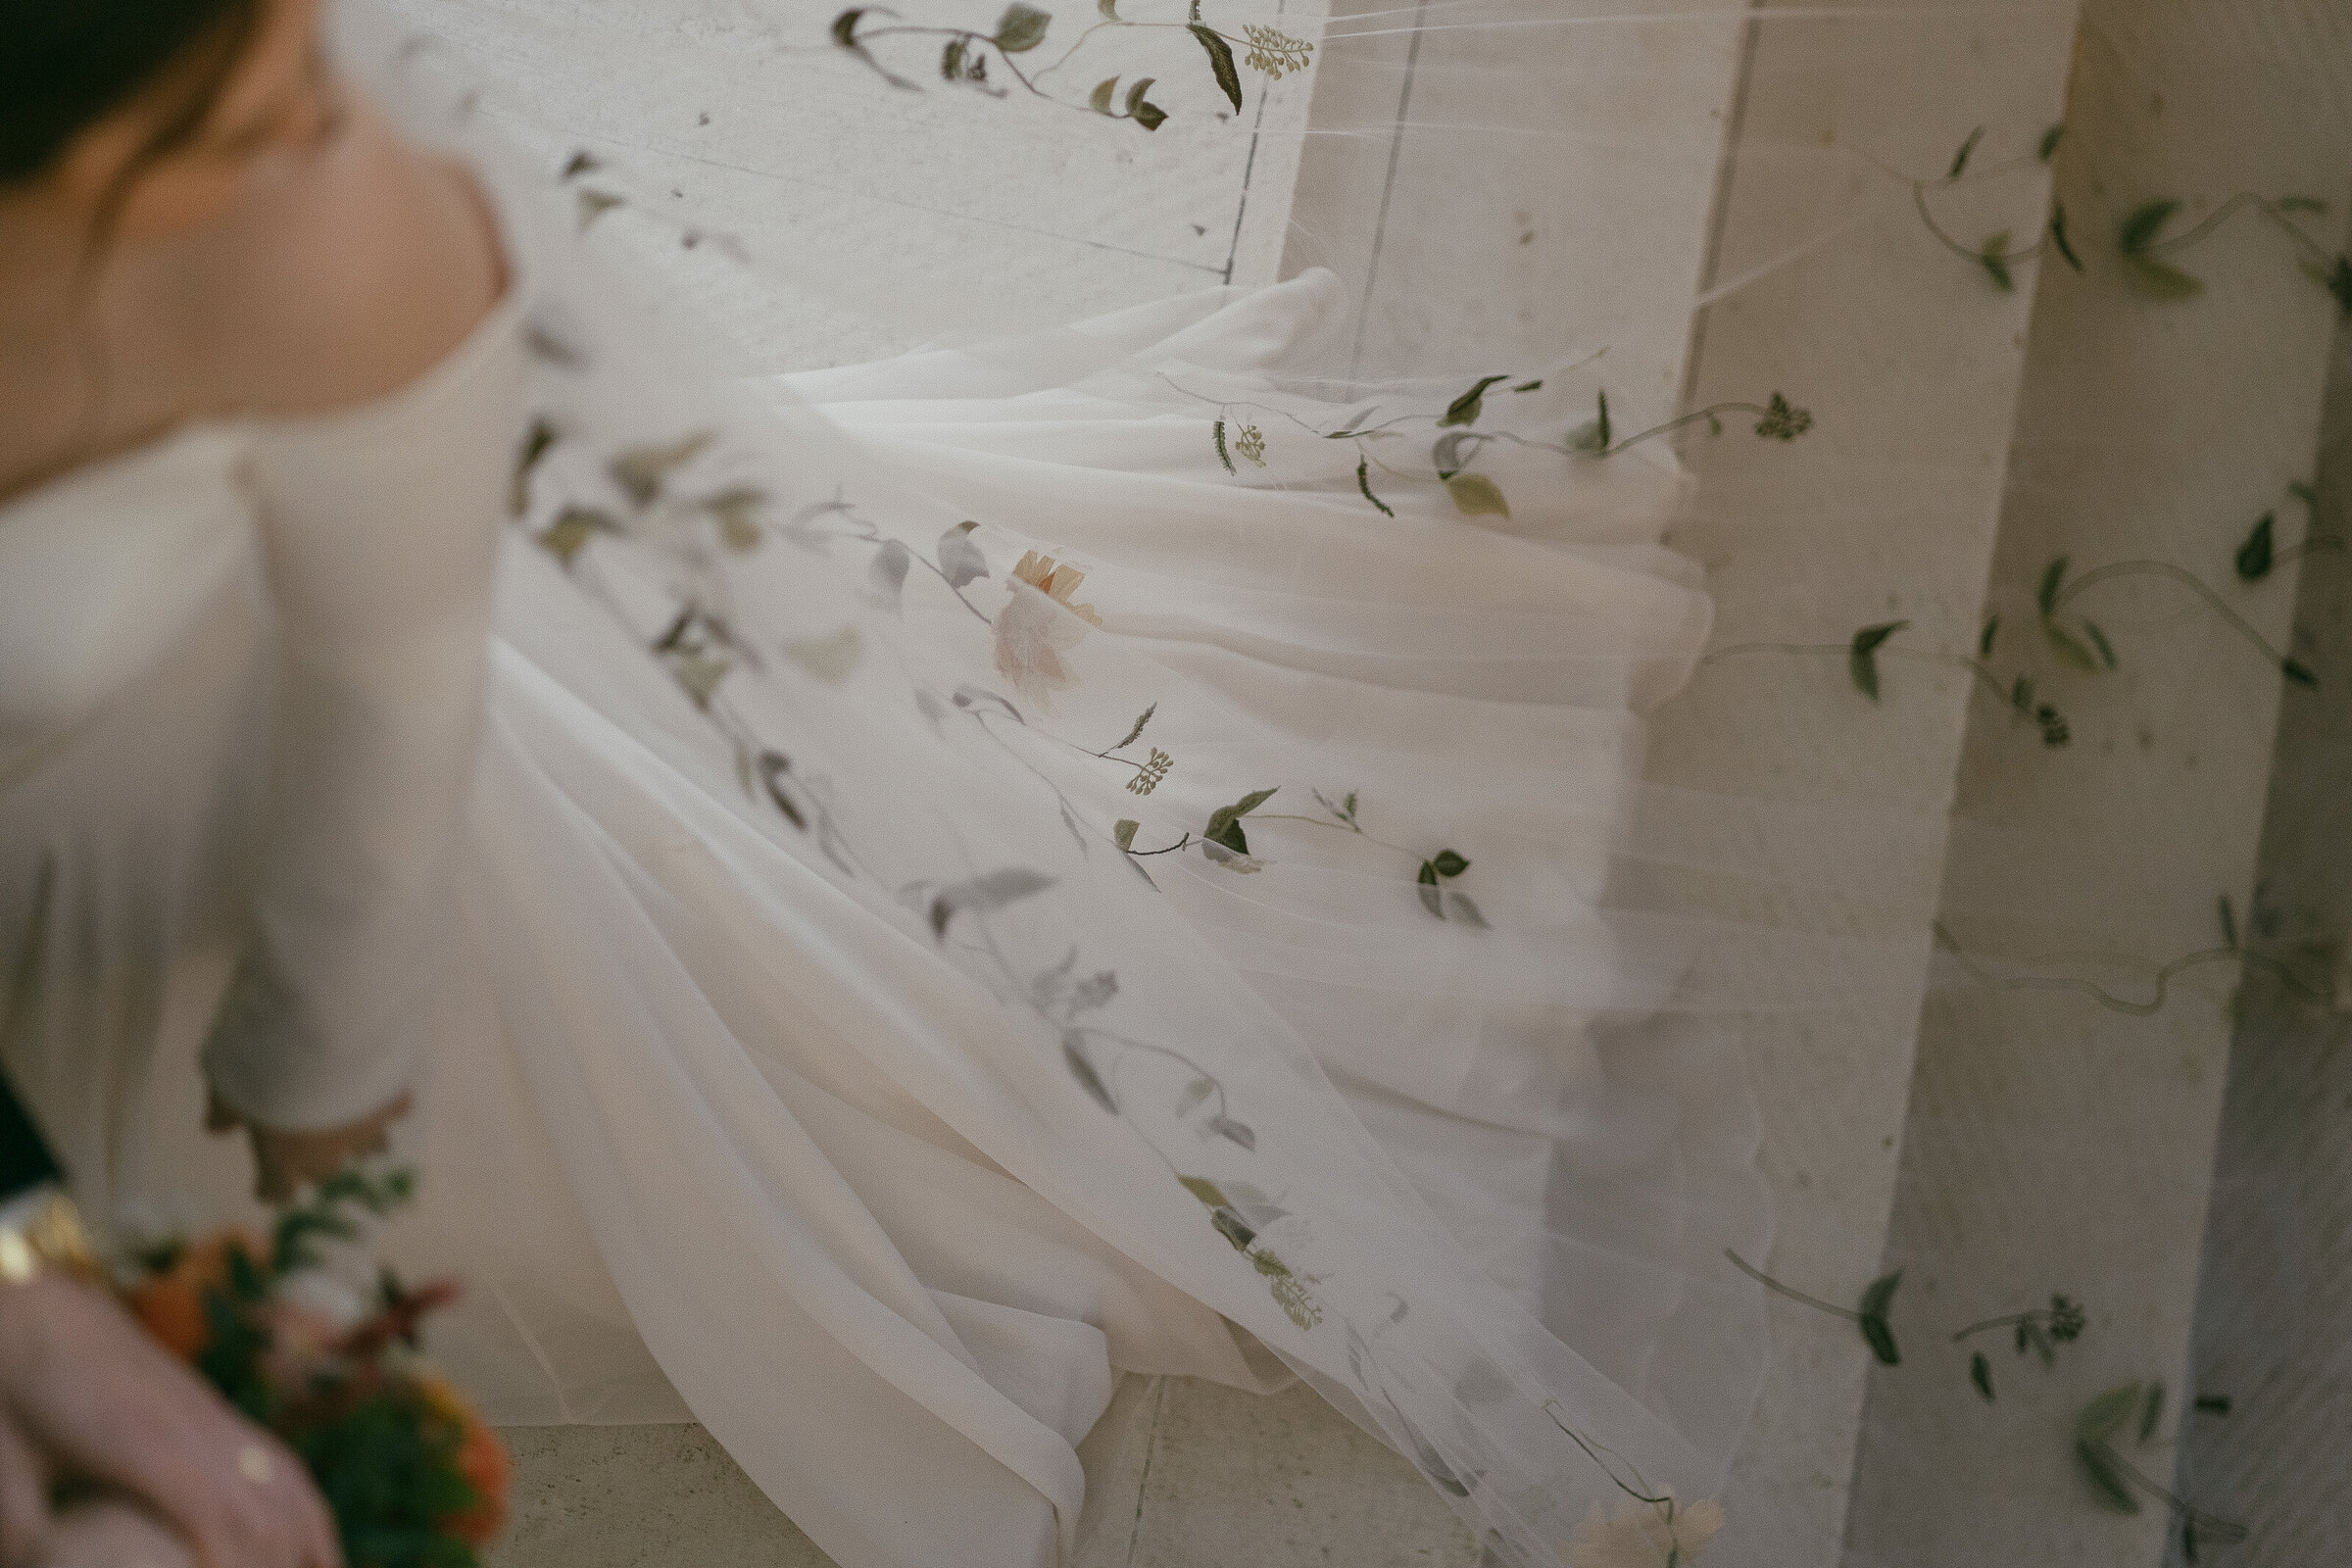 Close-up of a bride's veil with delicate floral embroidery.